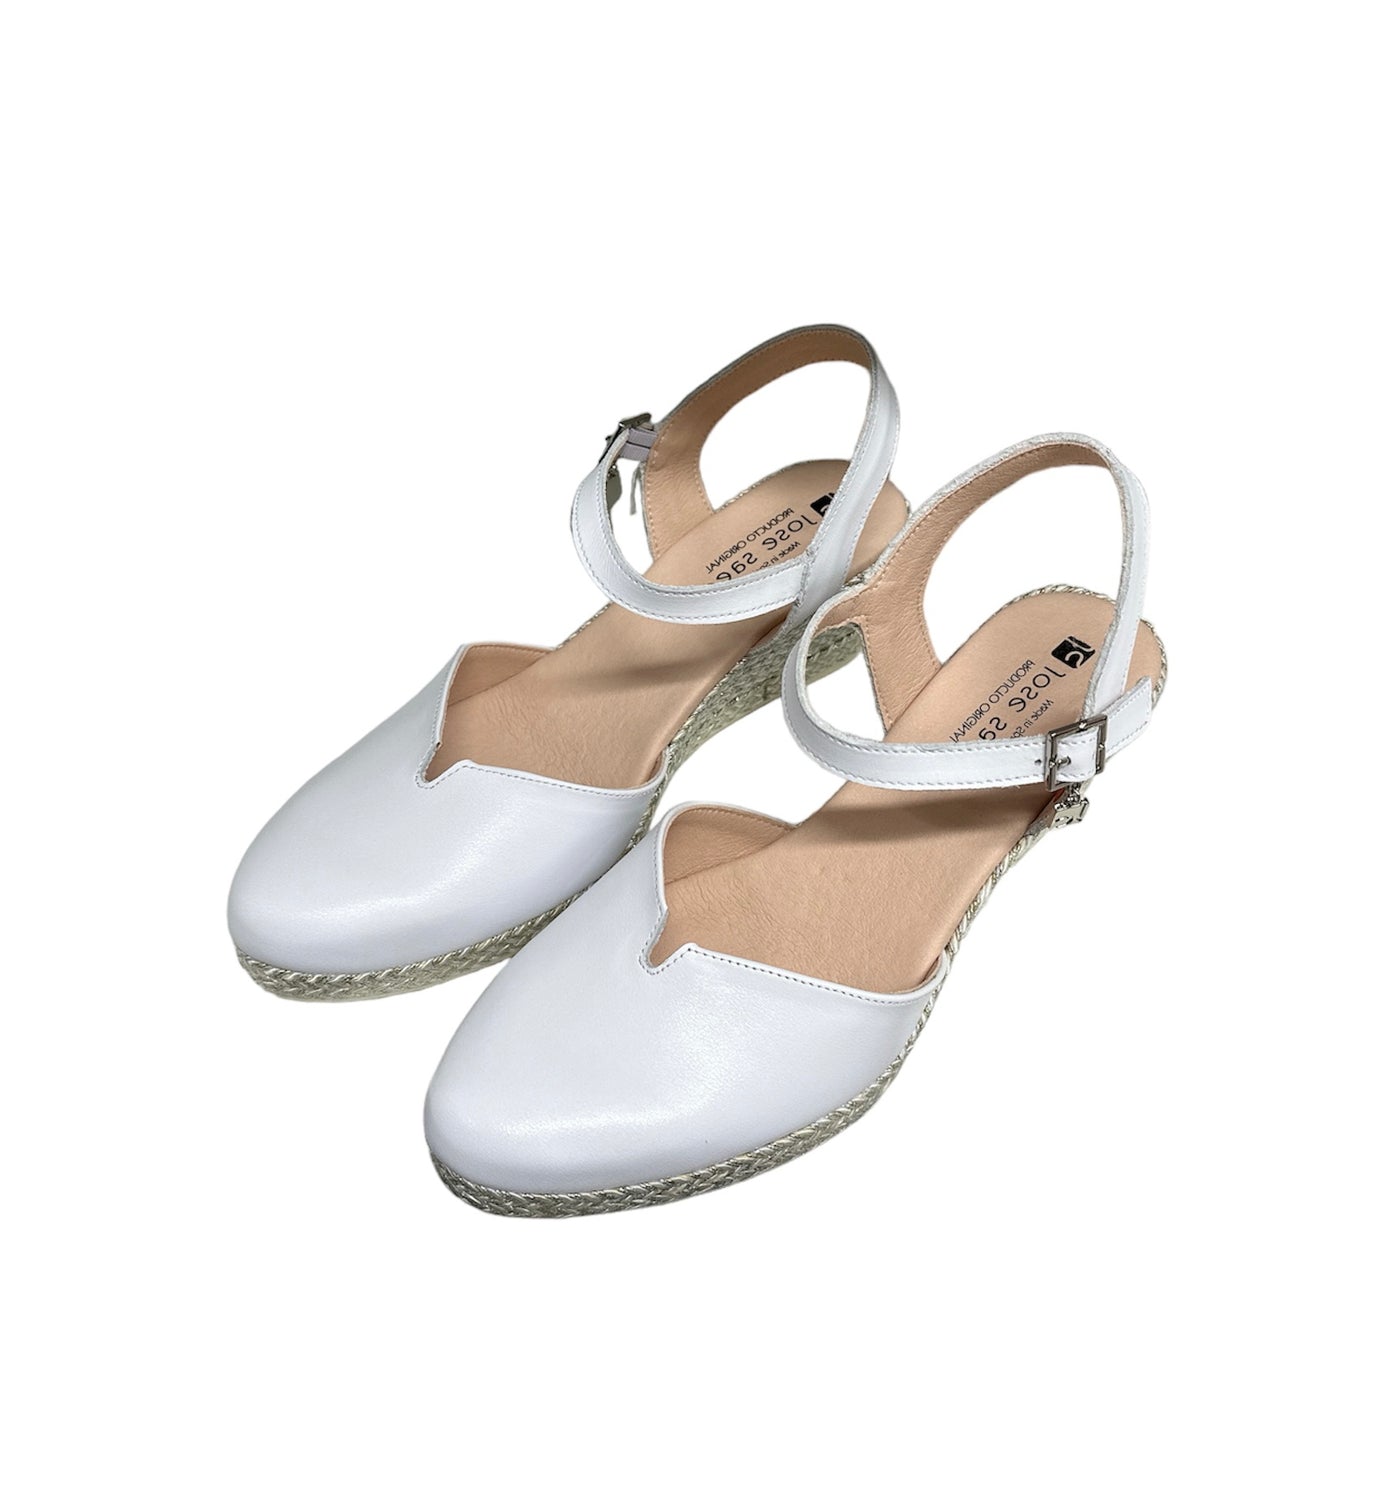 White Wedge Sandal With Strap